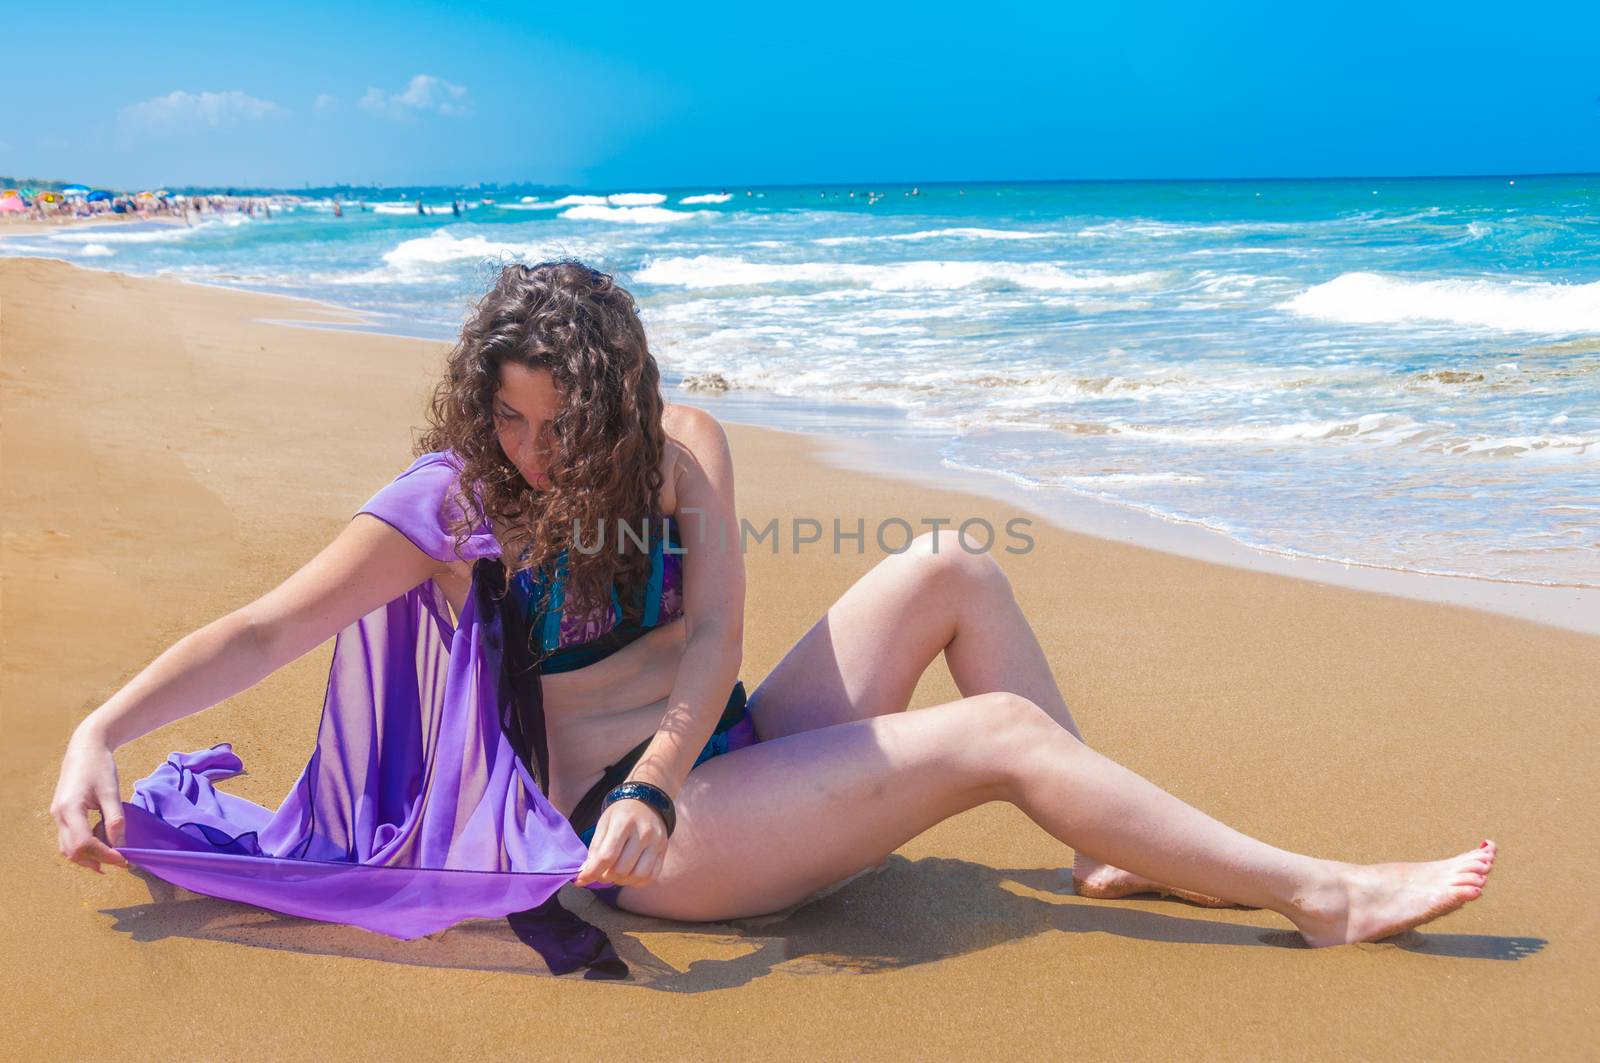 A girl sitting on a sandy beach, gently spreads a soaked purple, translucent cape.